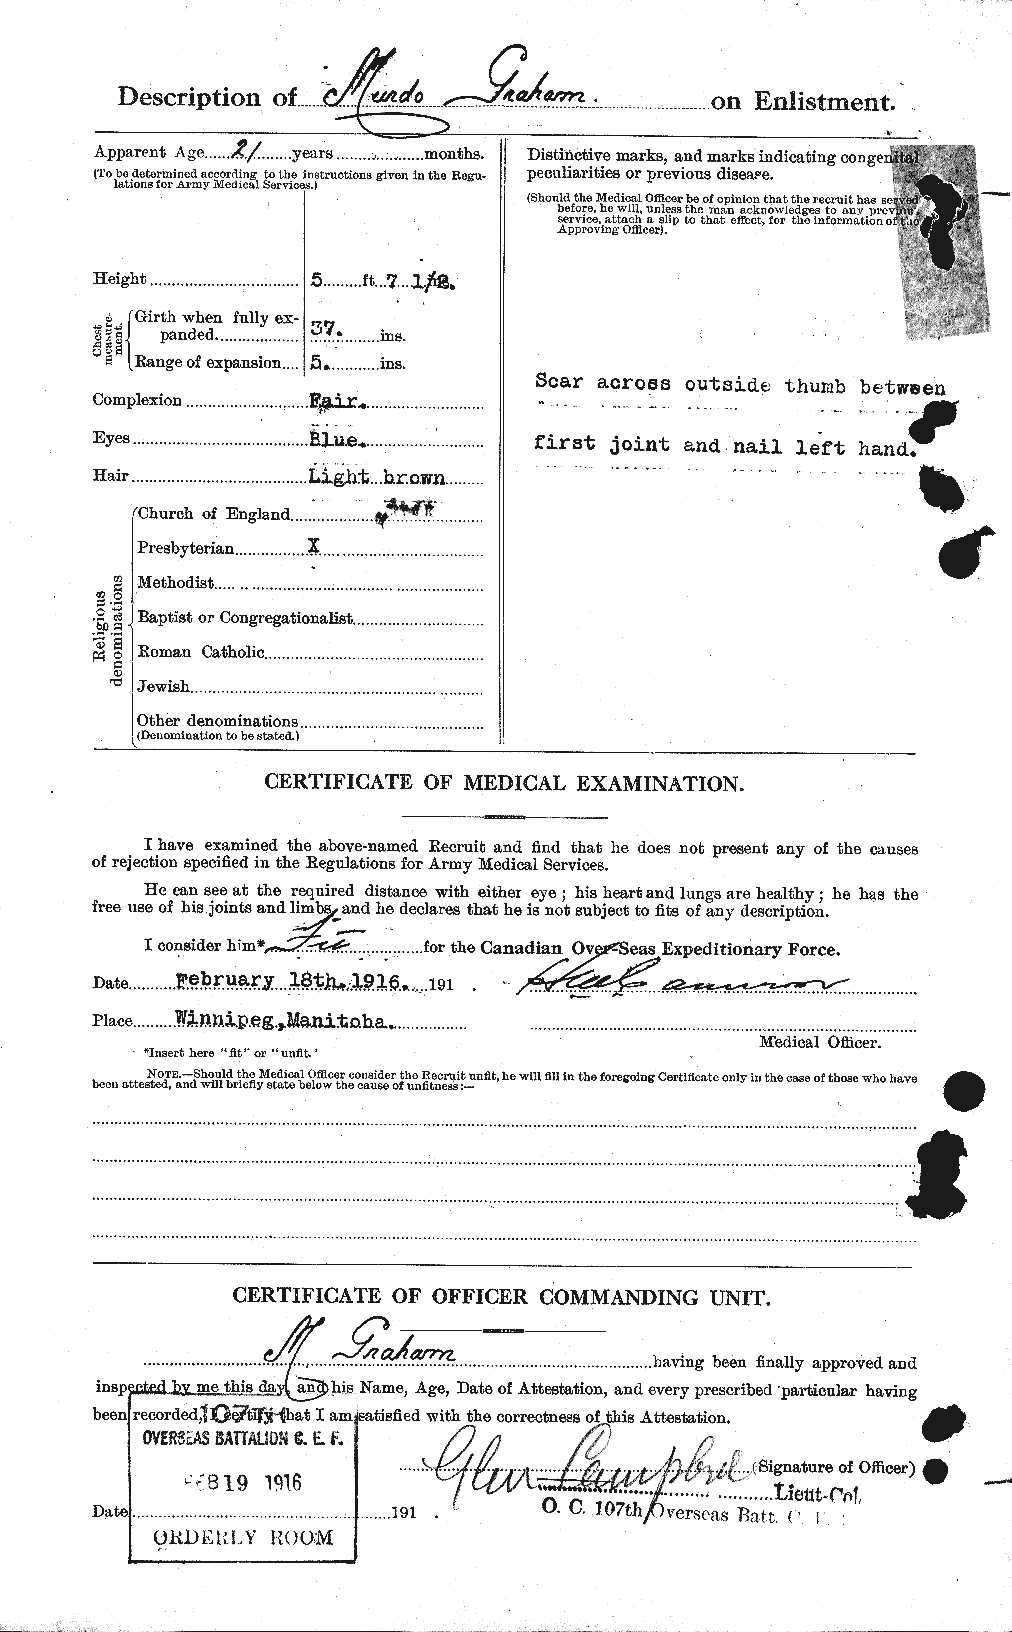 Personnel Records of the First World War - CEF 359312b